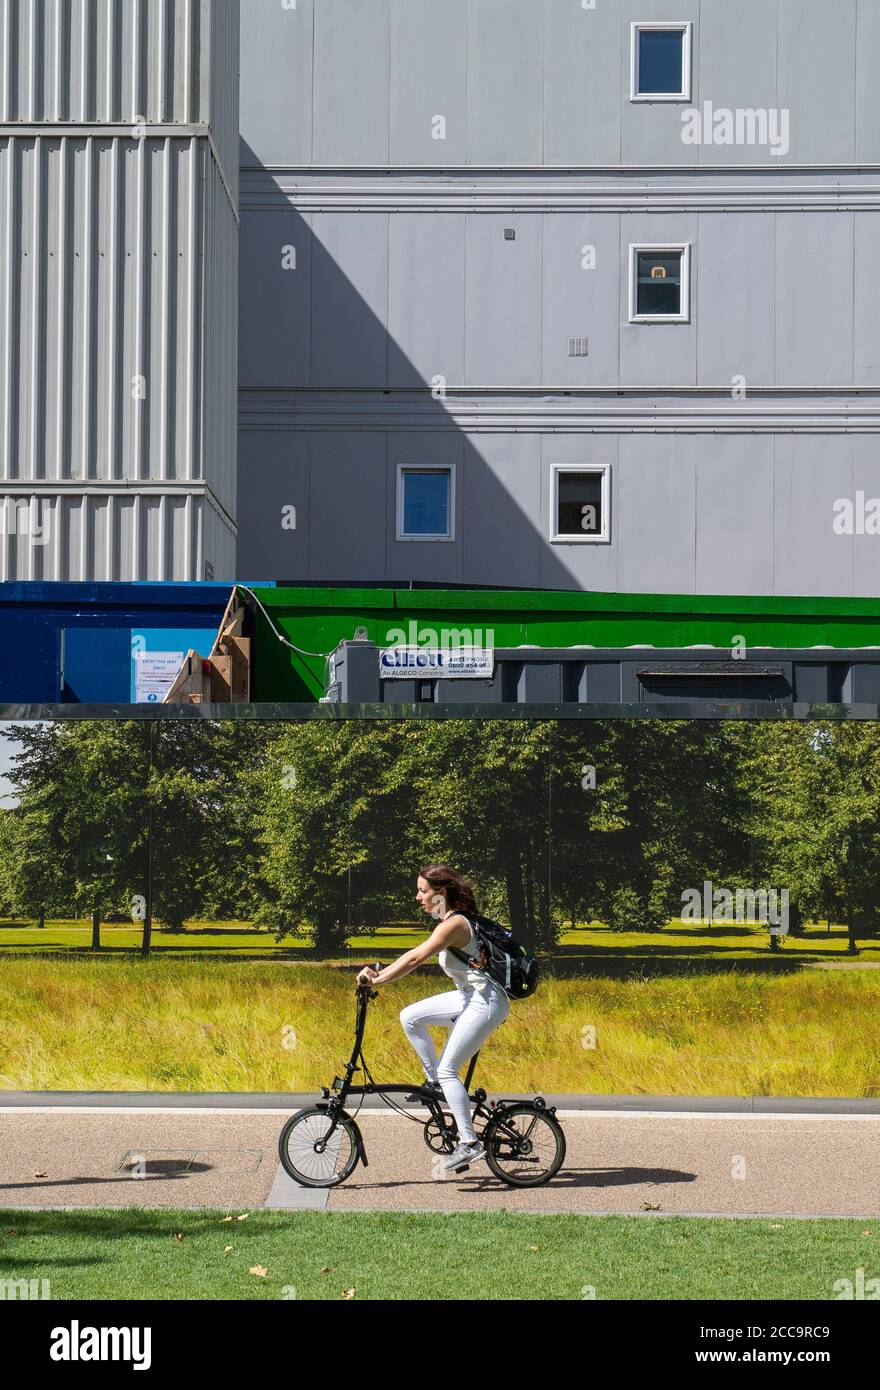 A cyclist rides past a hoarding showing a green woodland scene, outside a building site in north London, as people enjoy the warm weather after recent heavy rainfall. Stock Photo